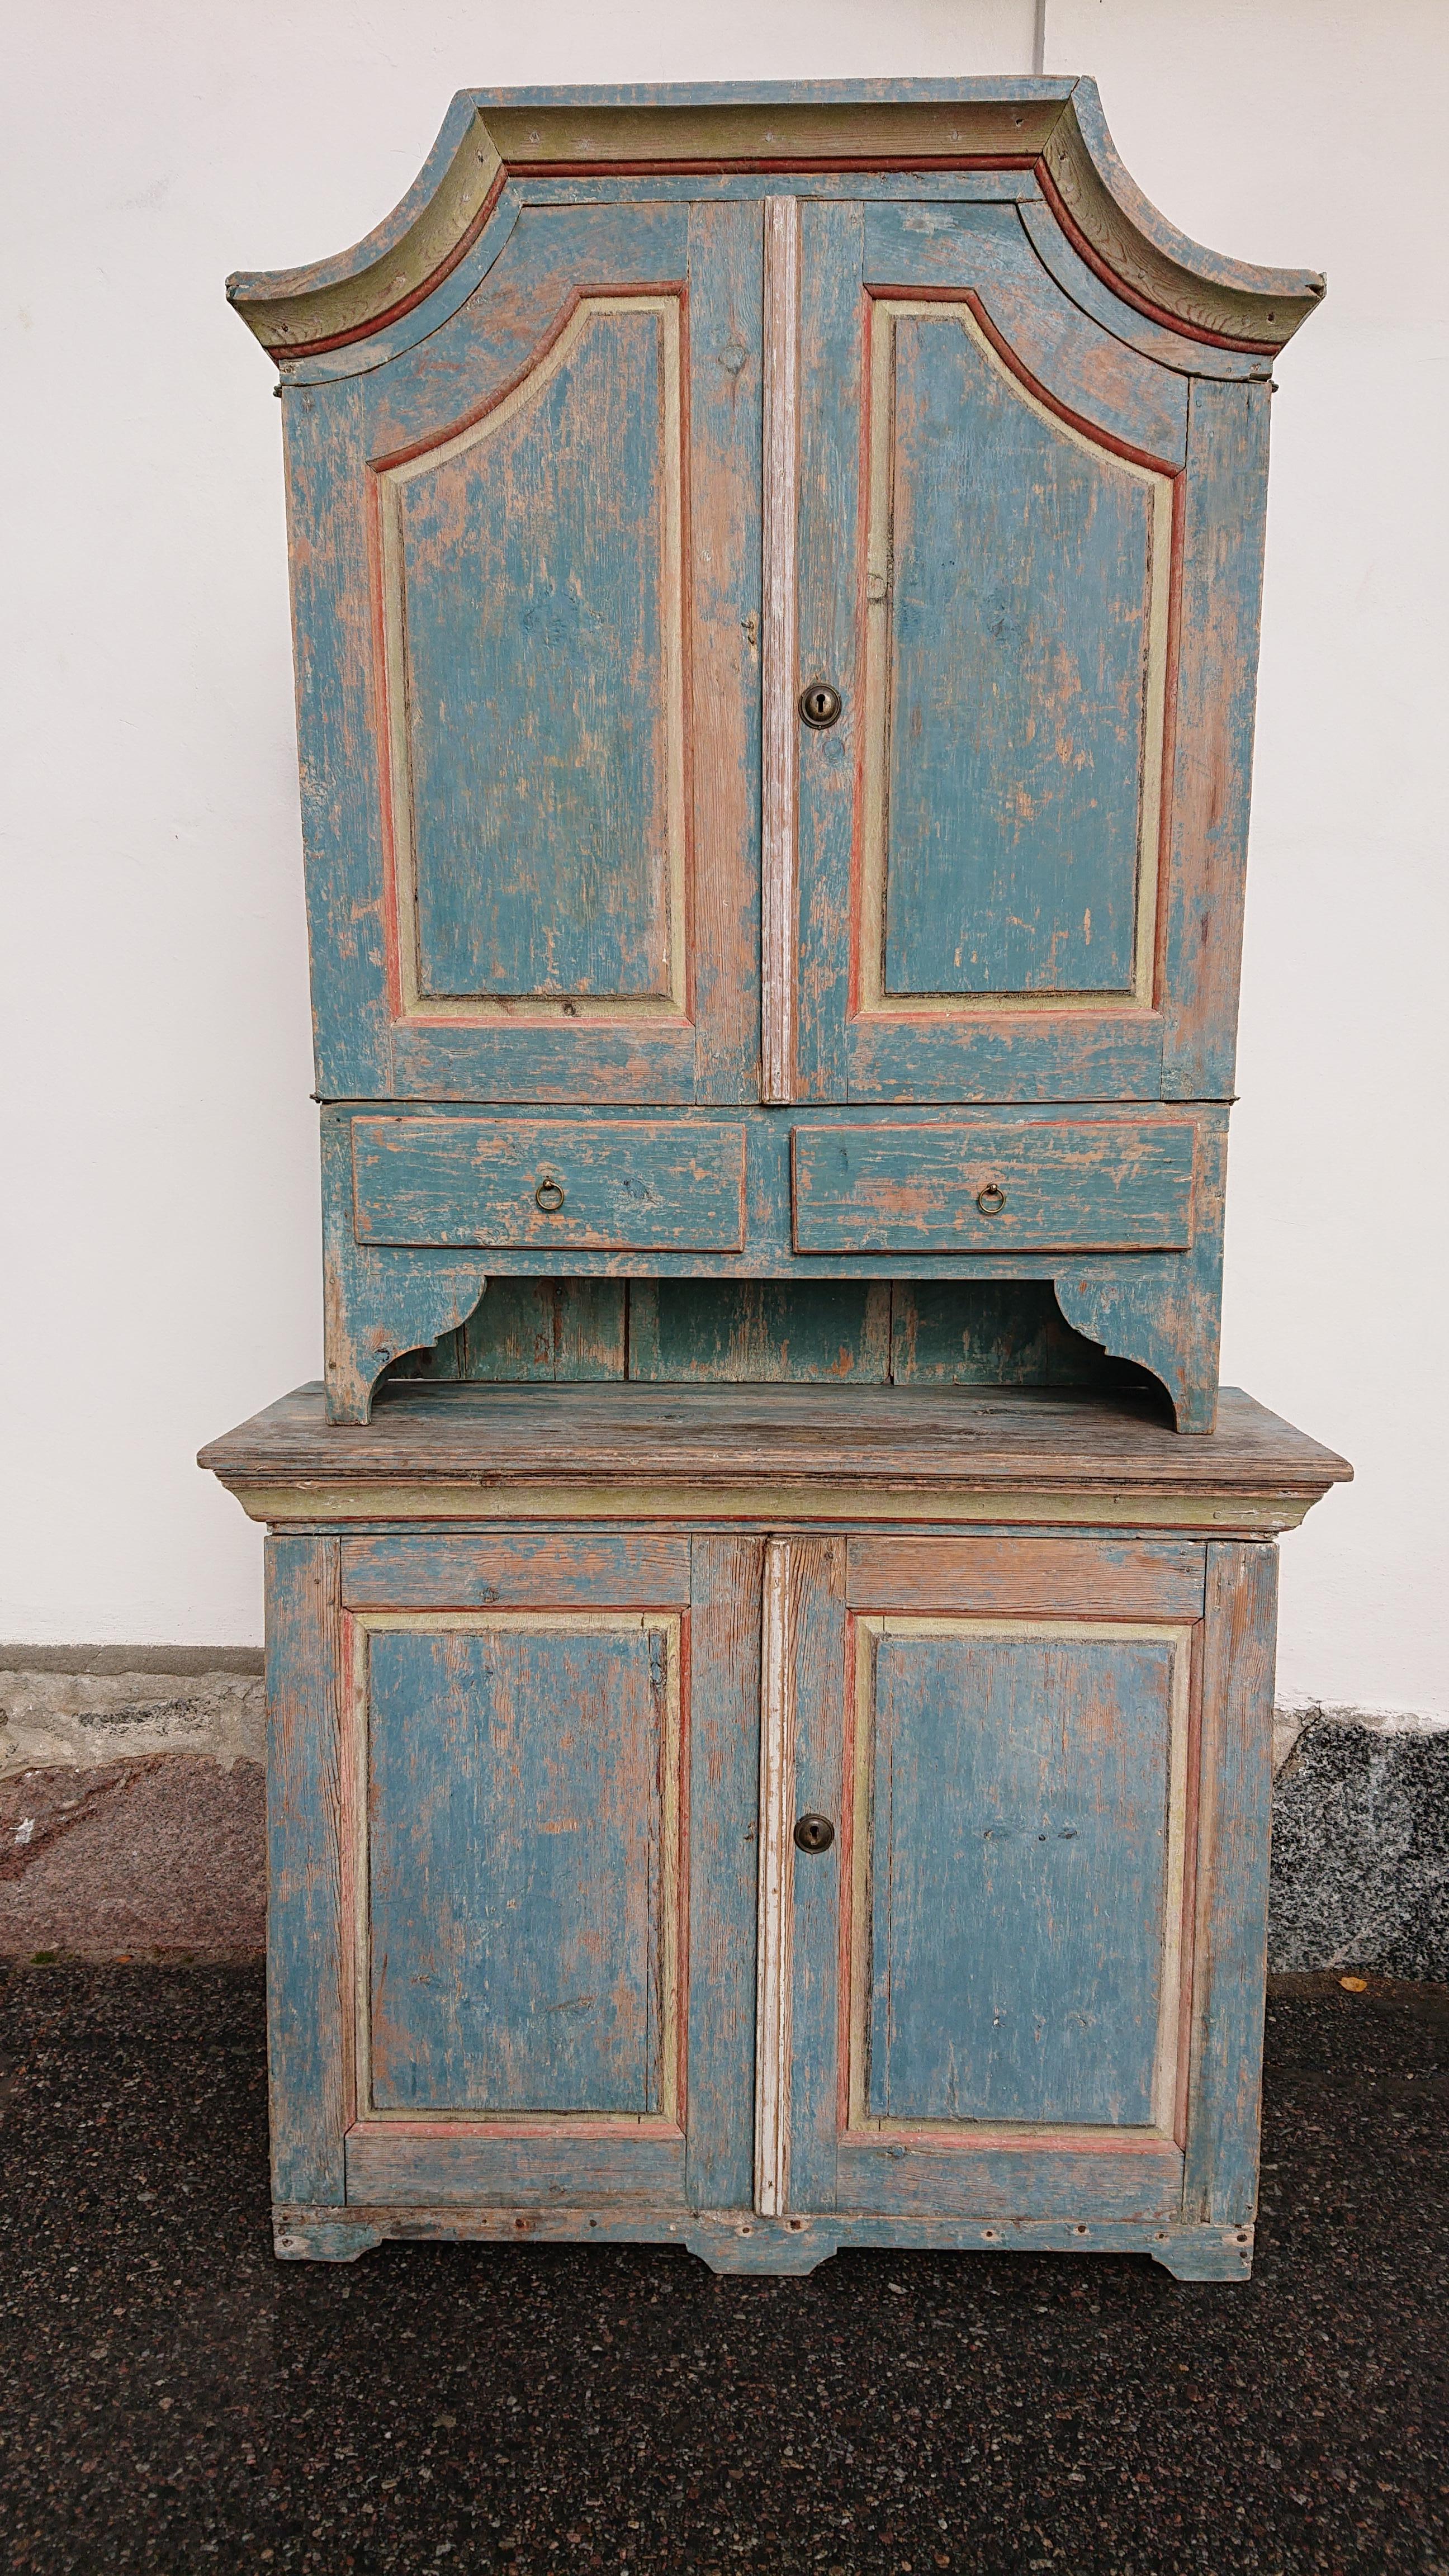 18th century Swedish late Baroque cabinet with original paint from Gumbodahed Skelleftea, Northern Sweden.
A magnificent late Baroque cabinet that is divisible into 2 parts.
Scraped by hand to its original paint .
So genuine with nice colors &